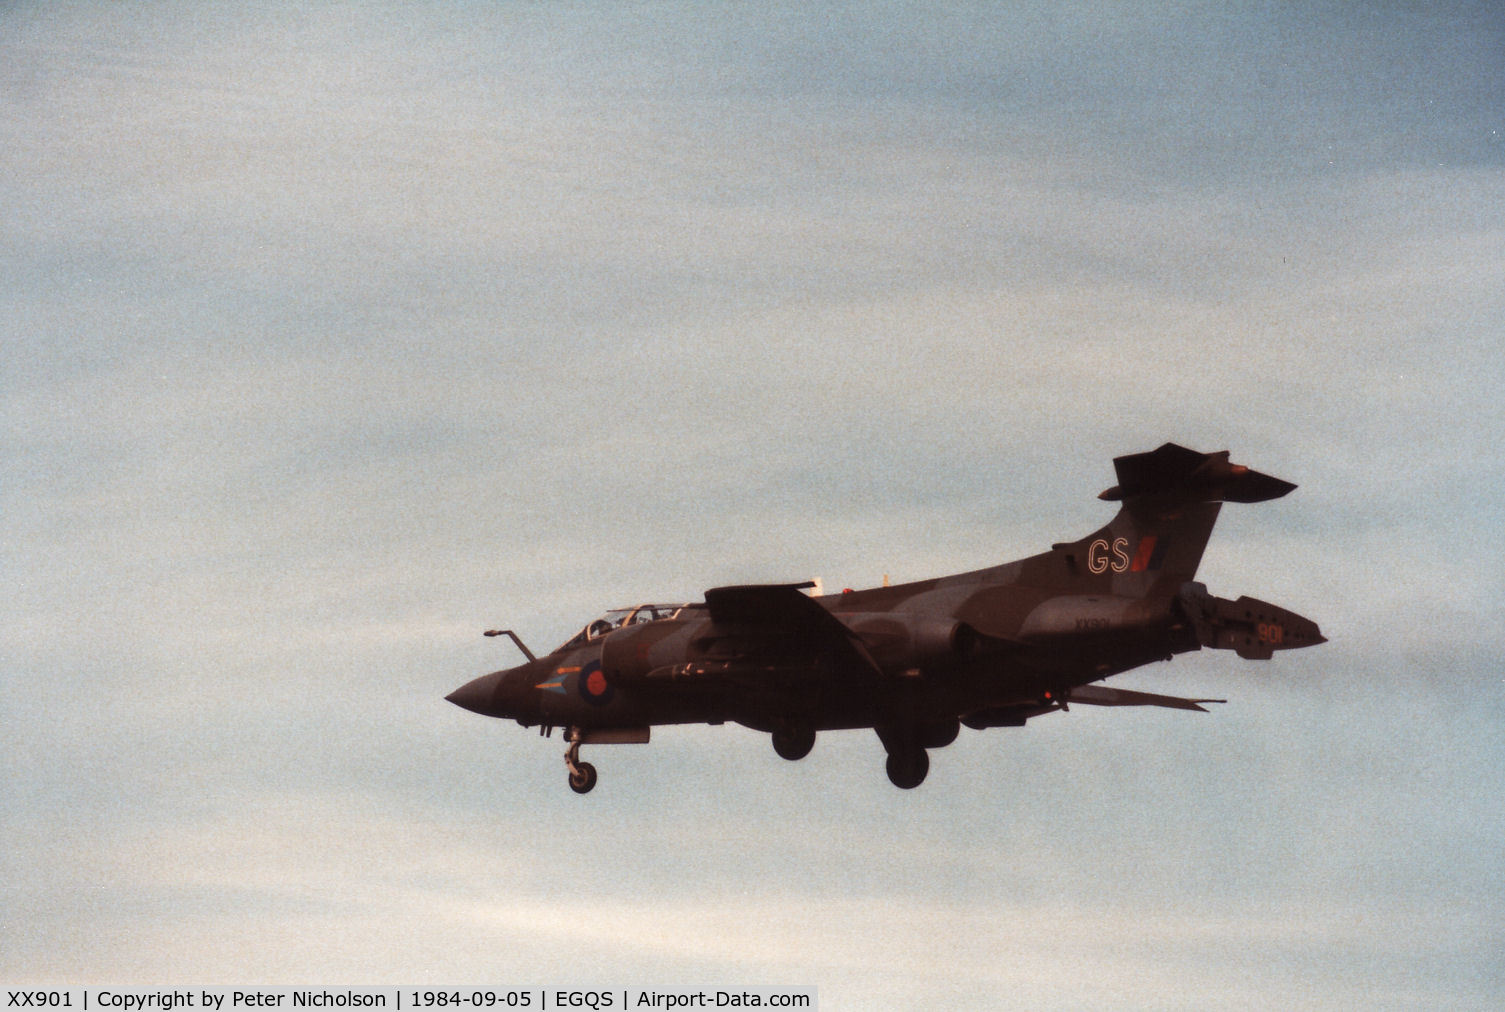 XX901, 1977 Hawker Siddeley Buccaneer S.2B C/N B3-06-75, Buccaneer S.2B of 208 Squadron with the air brake deployed landing at RAF Lossiemouth in September 1984.